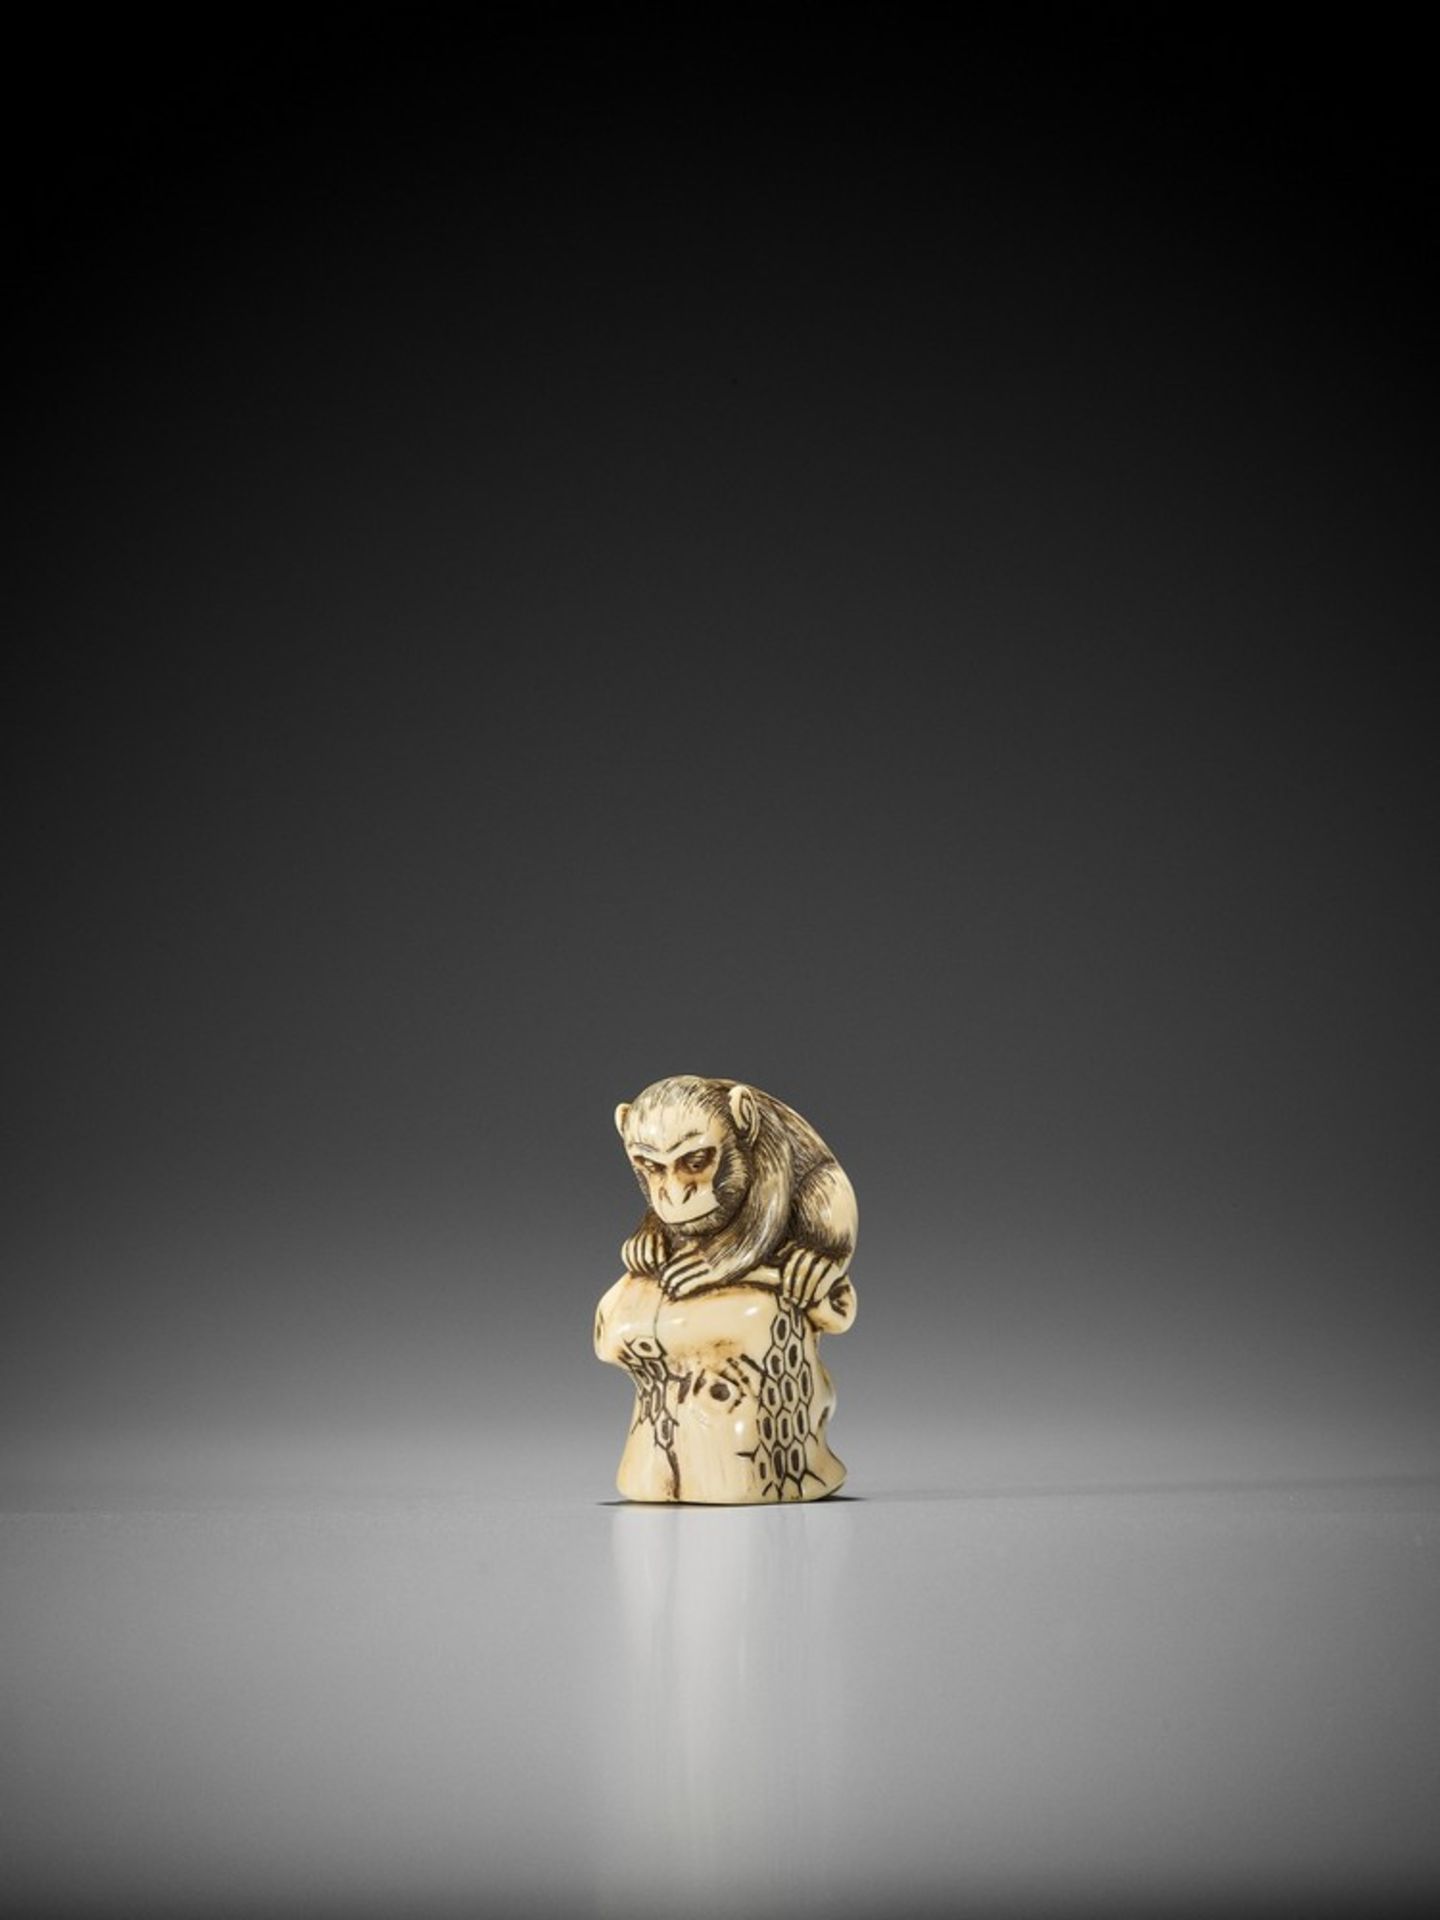 SEIMIKEN: AN IVORY NETSUKE OF A MONKEY ON TOP OF A BEEHIVE Signed Seimiken 青未軒Japan, early 19th